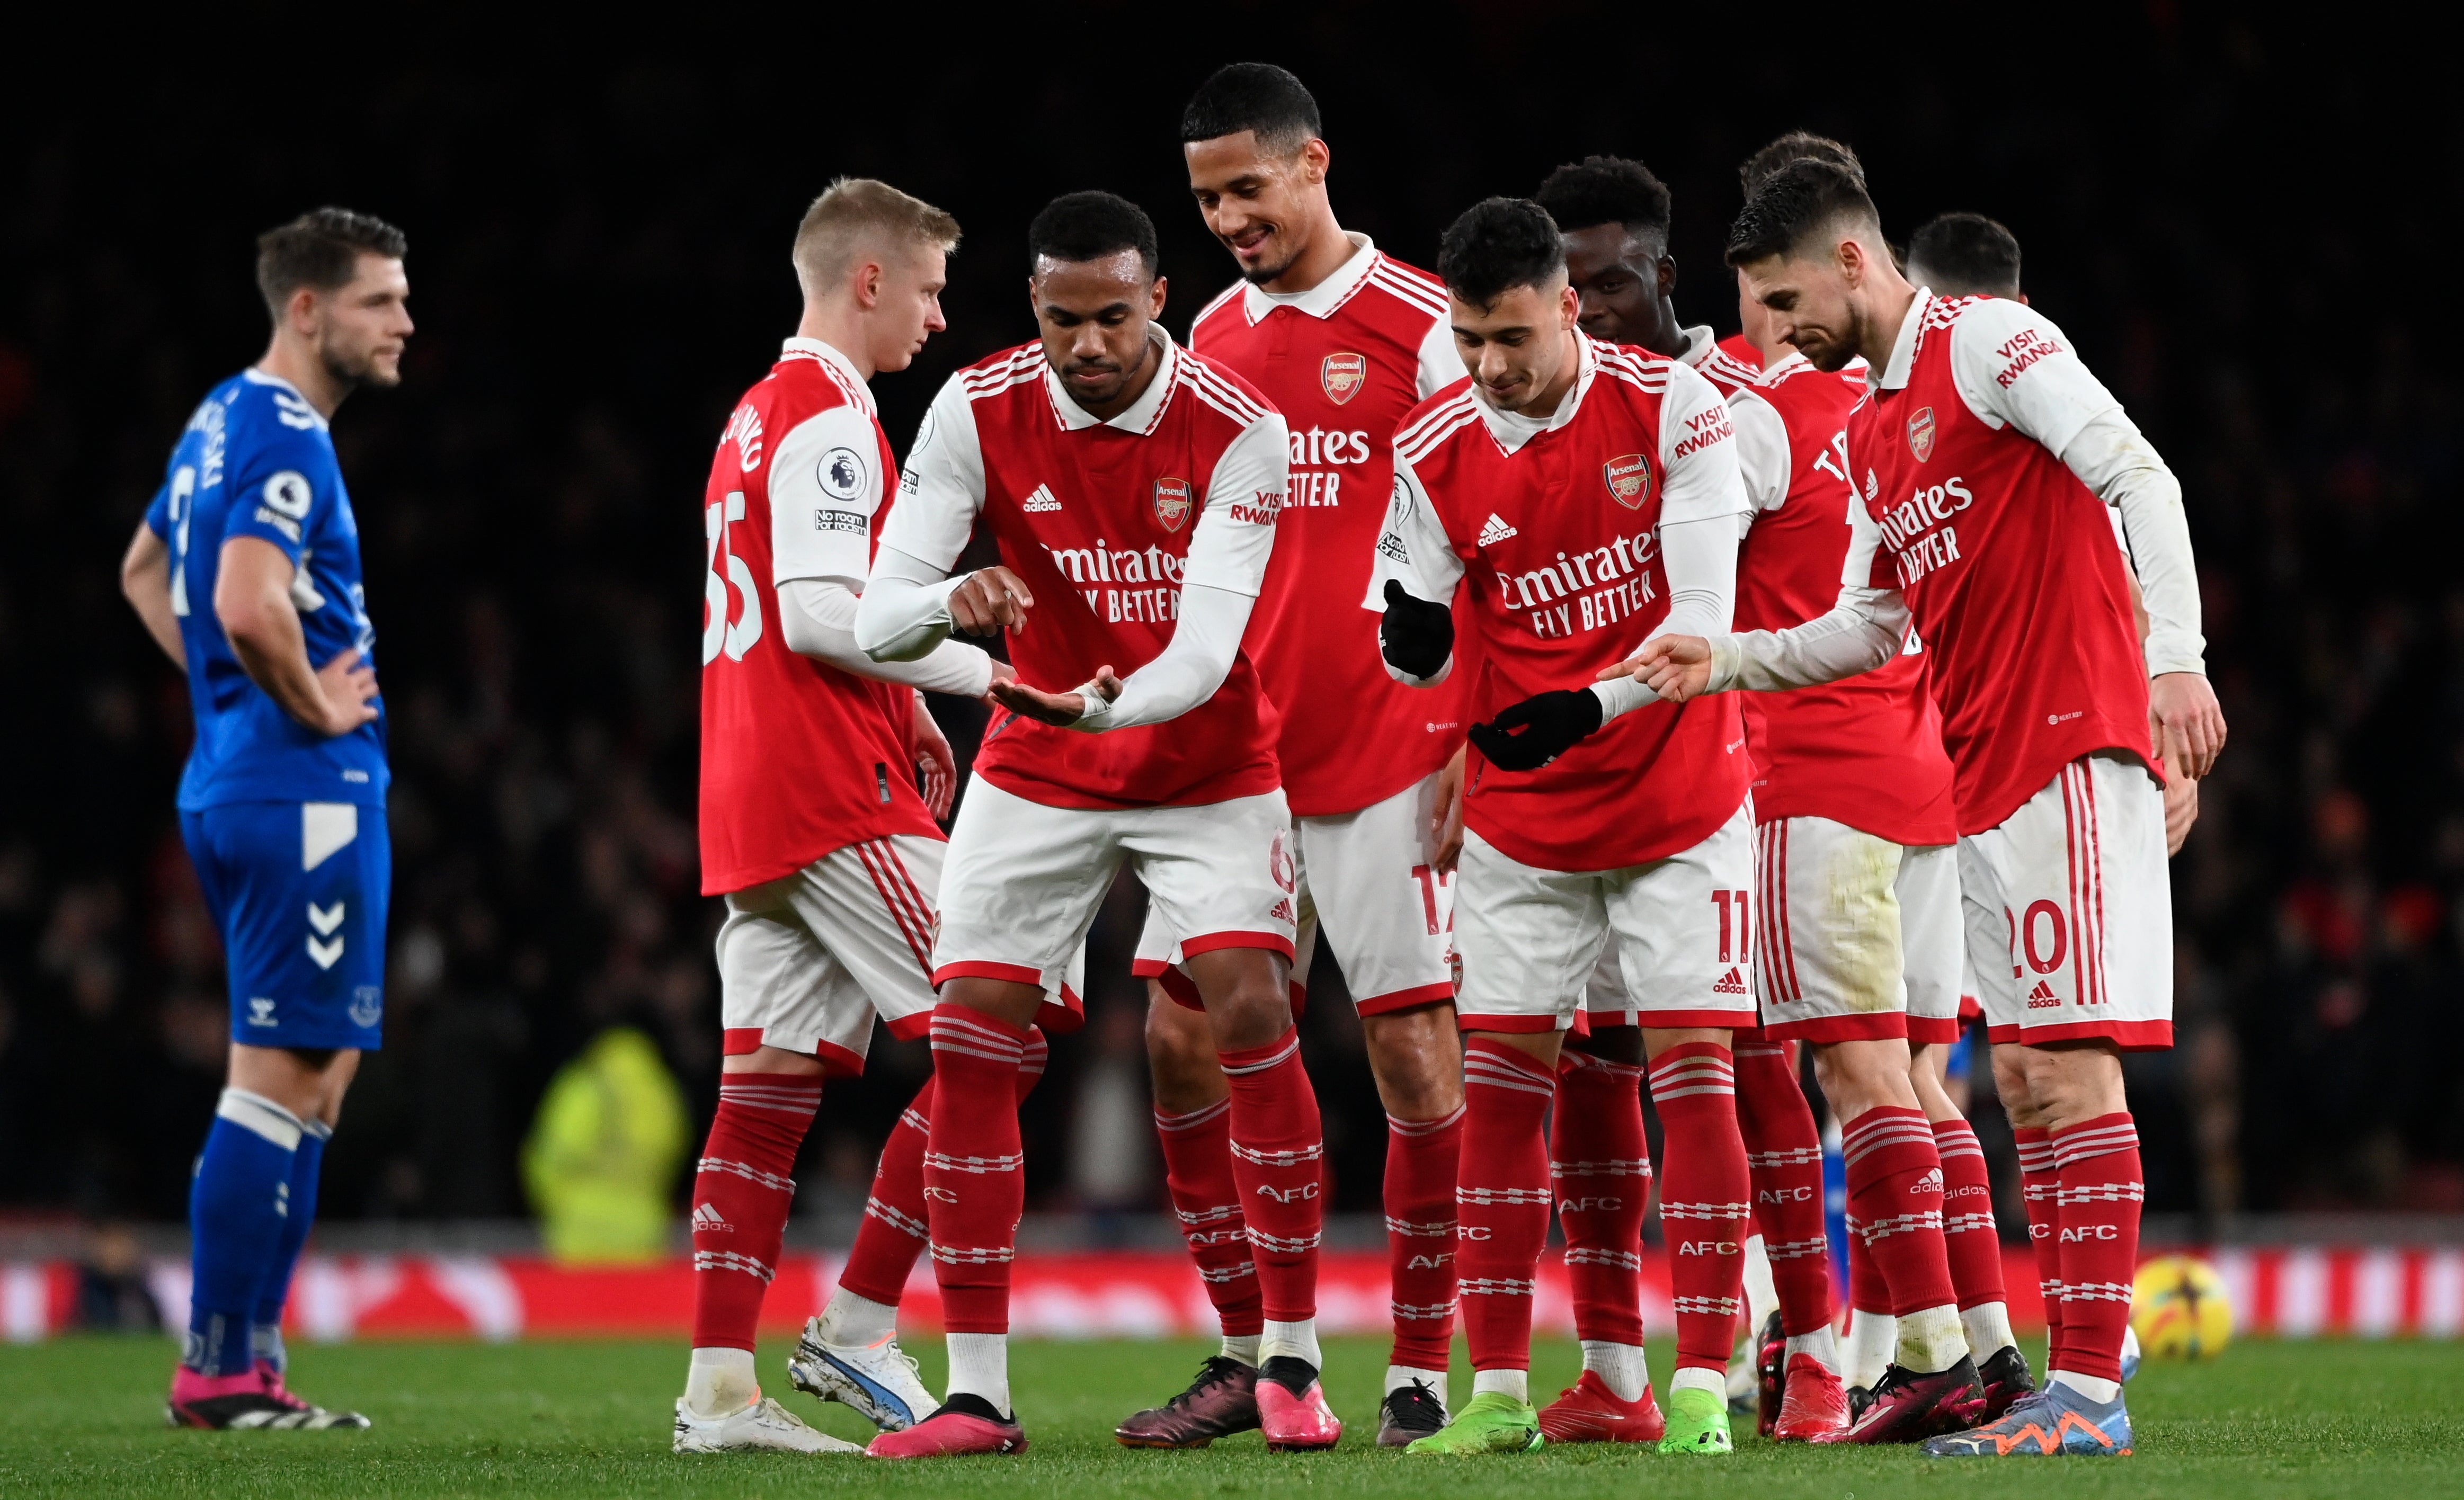 Arsenal vs Everton LIVE Premier League result and reaction from Emirates Stadium